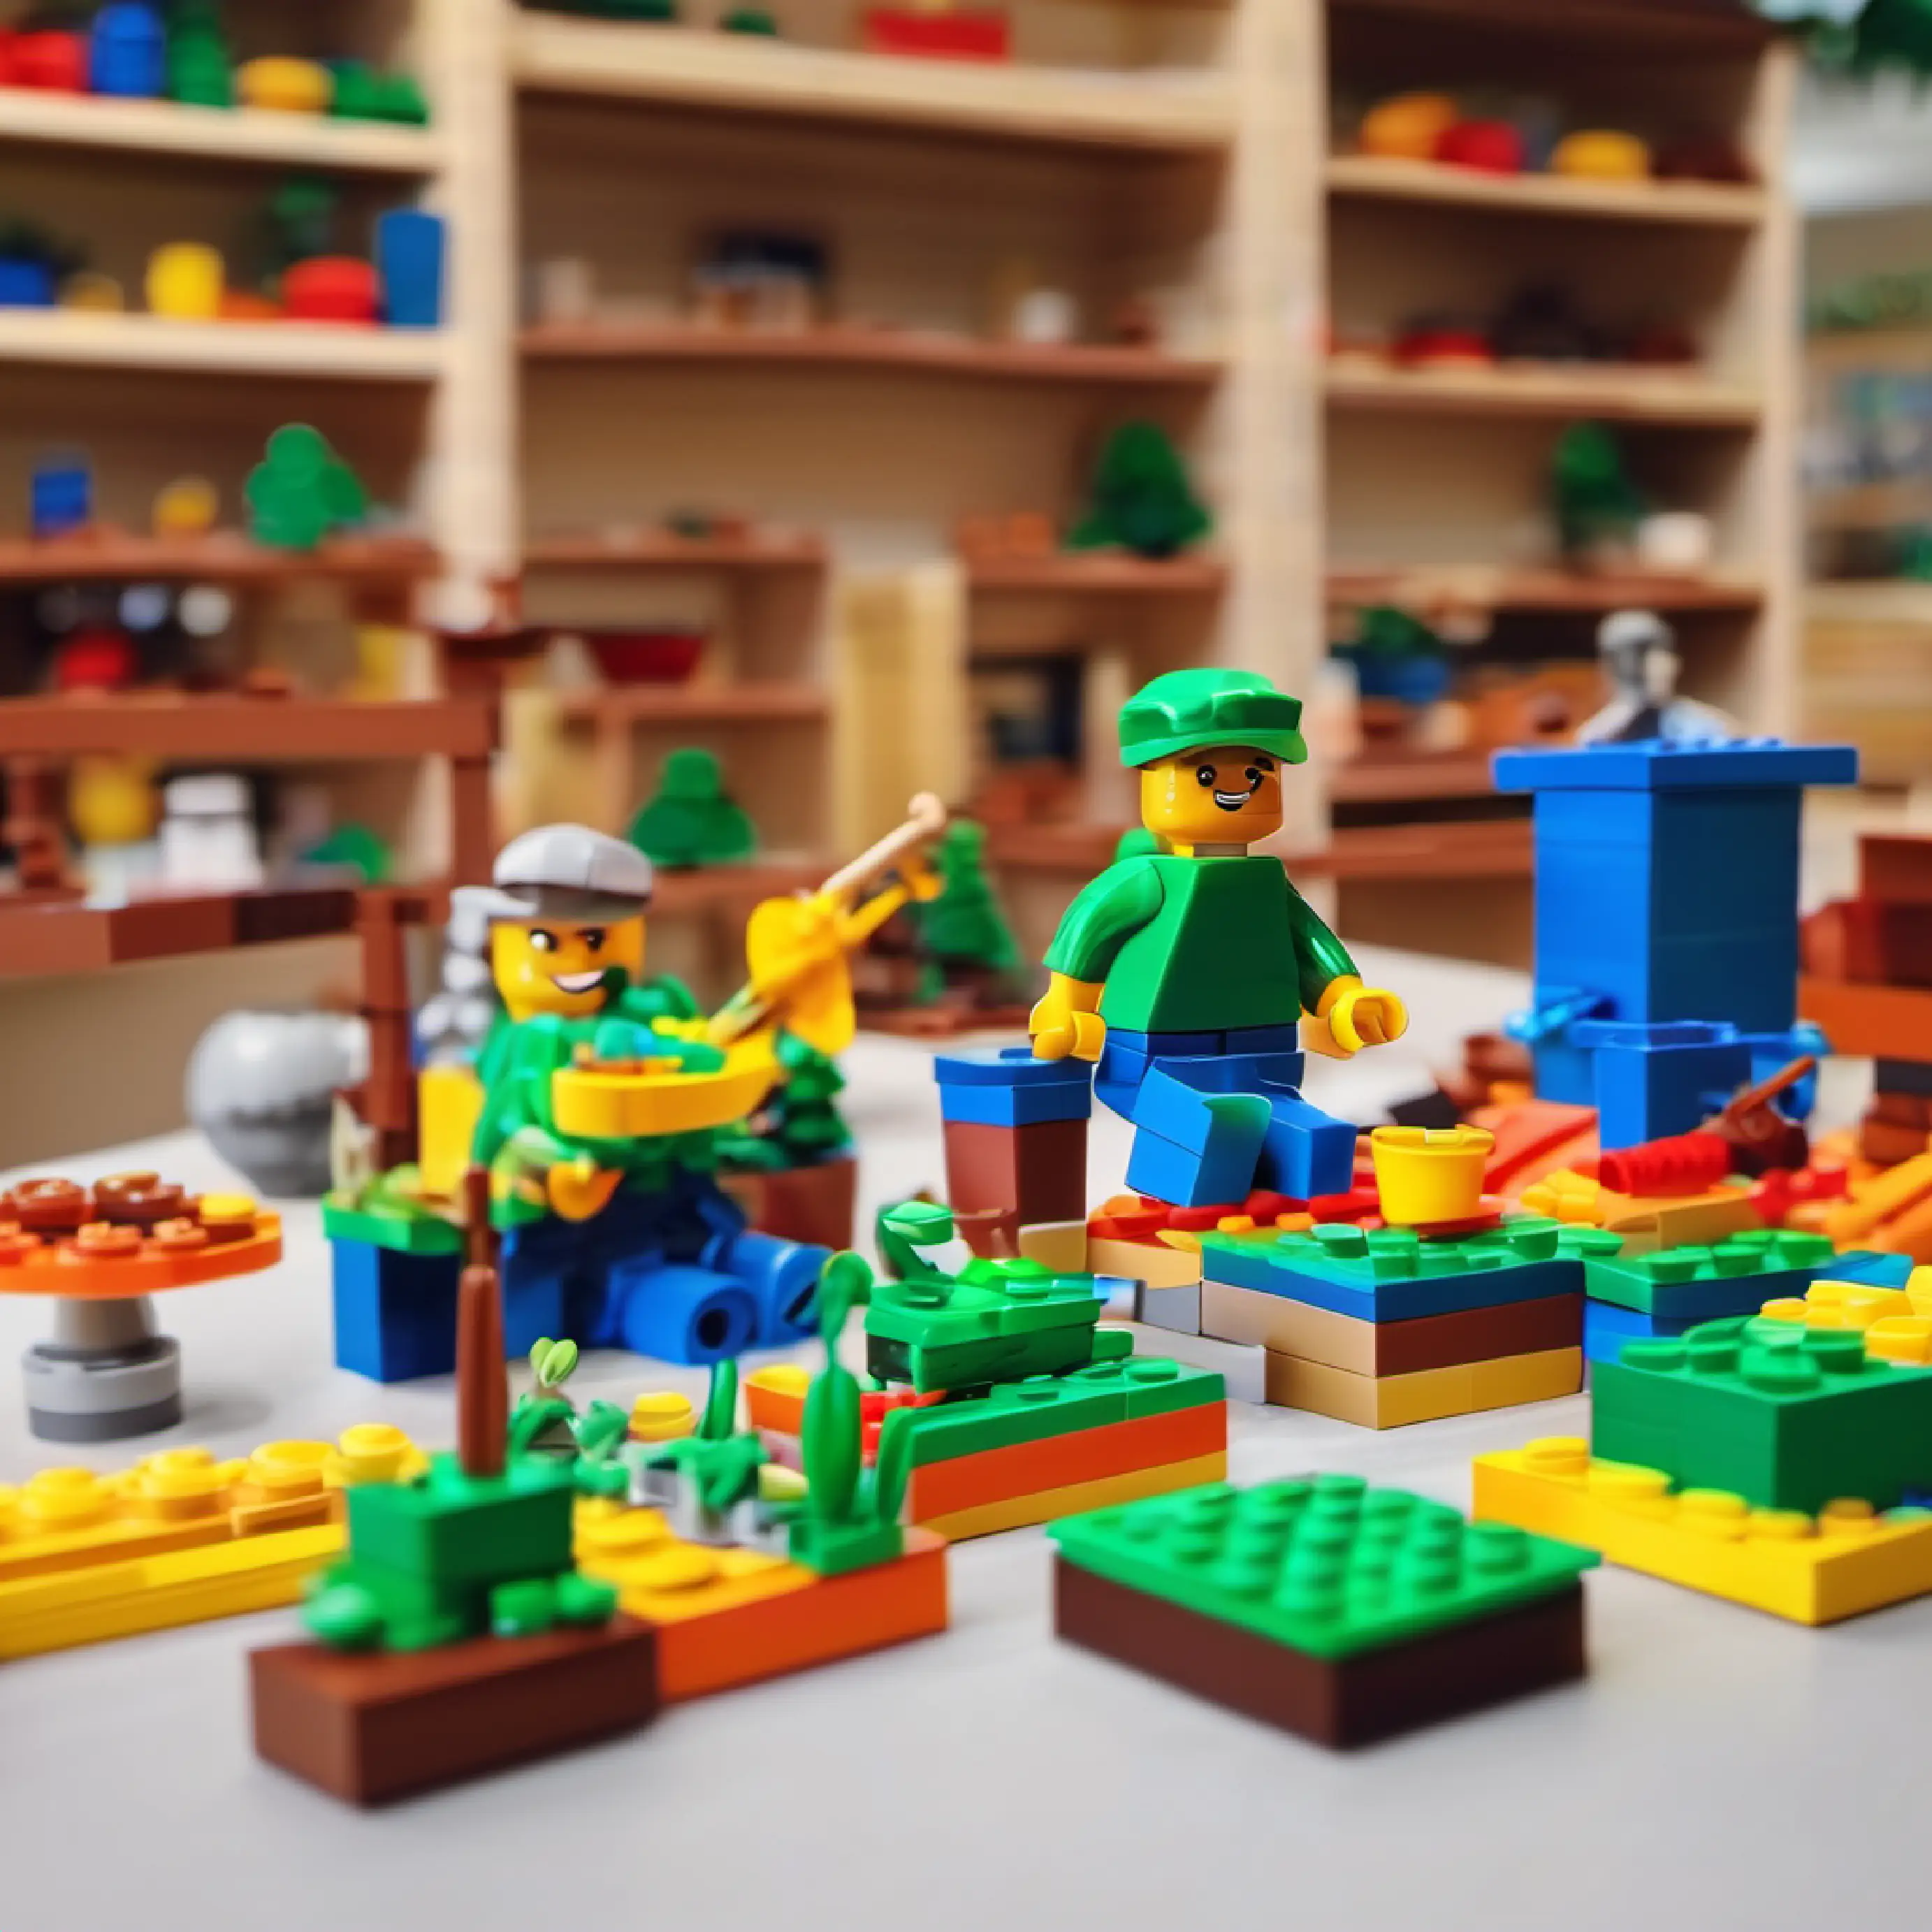 Completing the Lego world in reality